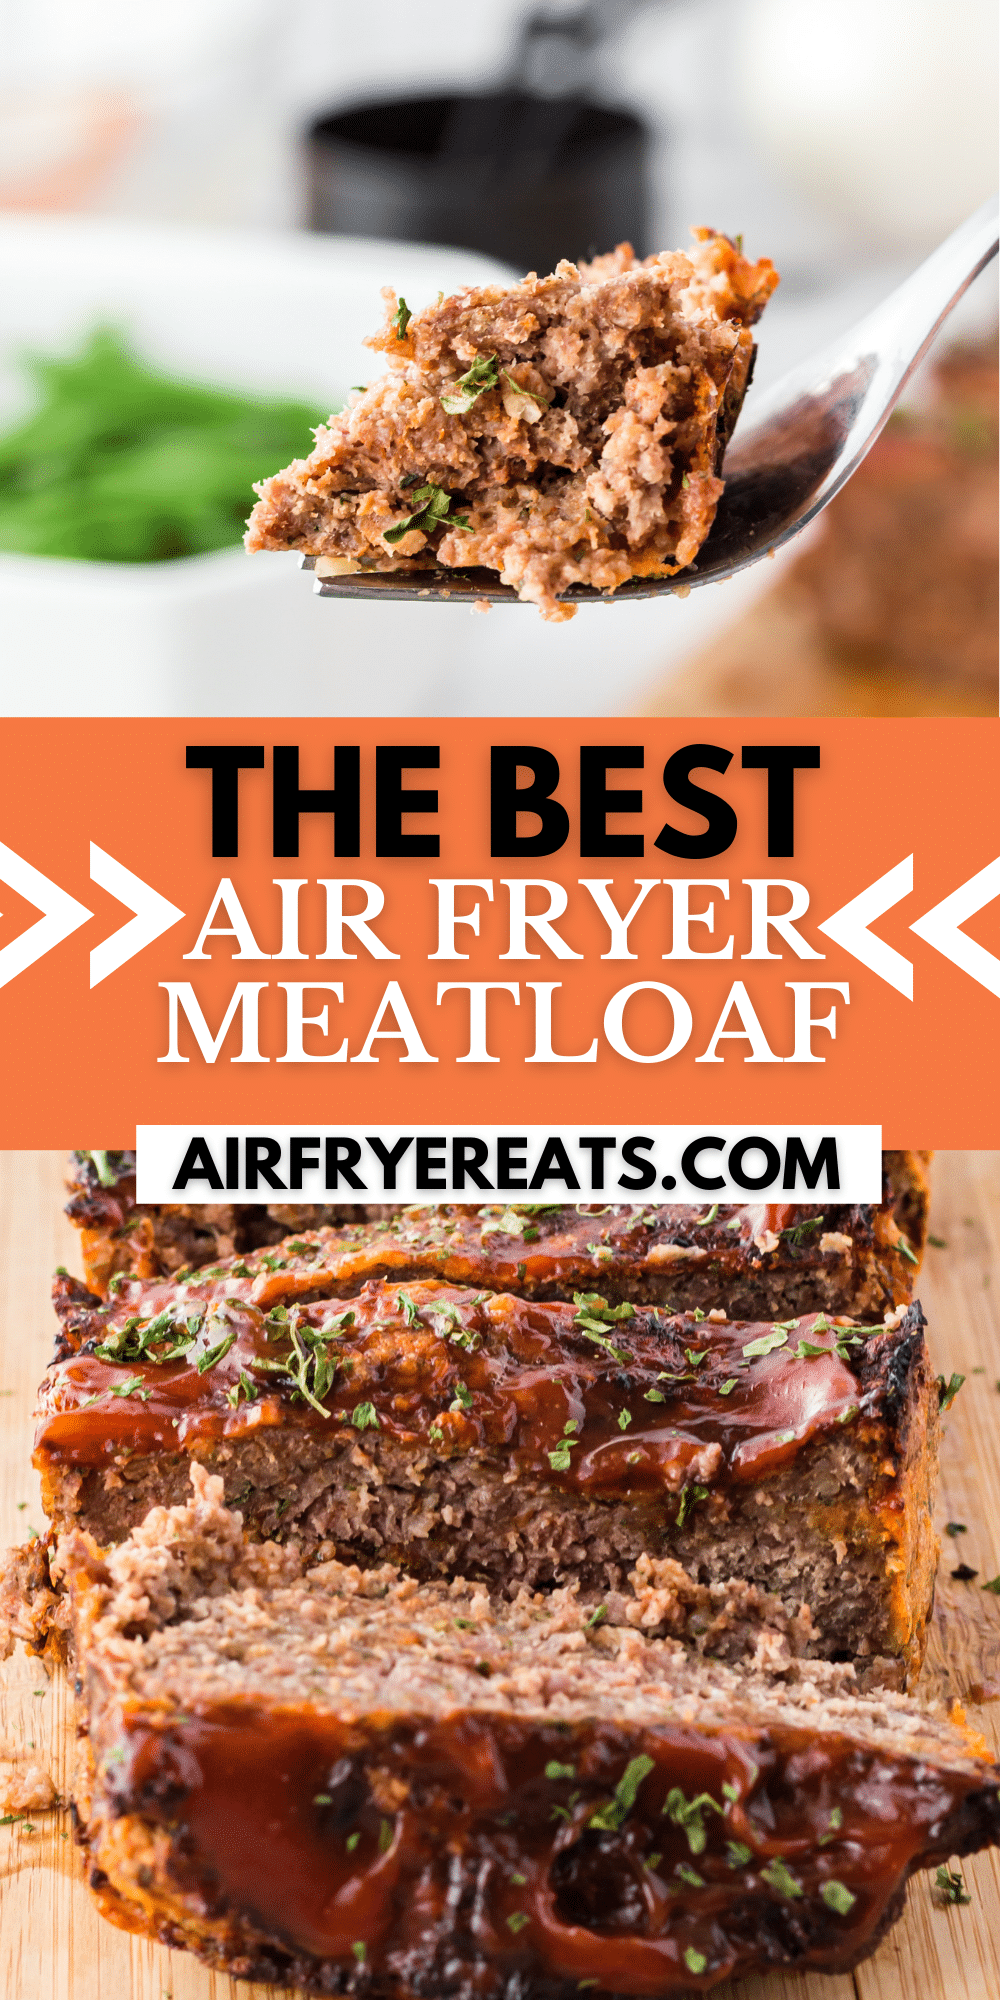 Ninja Foodi Meatloaf is ready in just 20 minutes! Make a homestyle dinner in less time using the Air Fryer function of your Foodi. #foodi #meatloaf via @vegetarianmamma